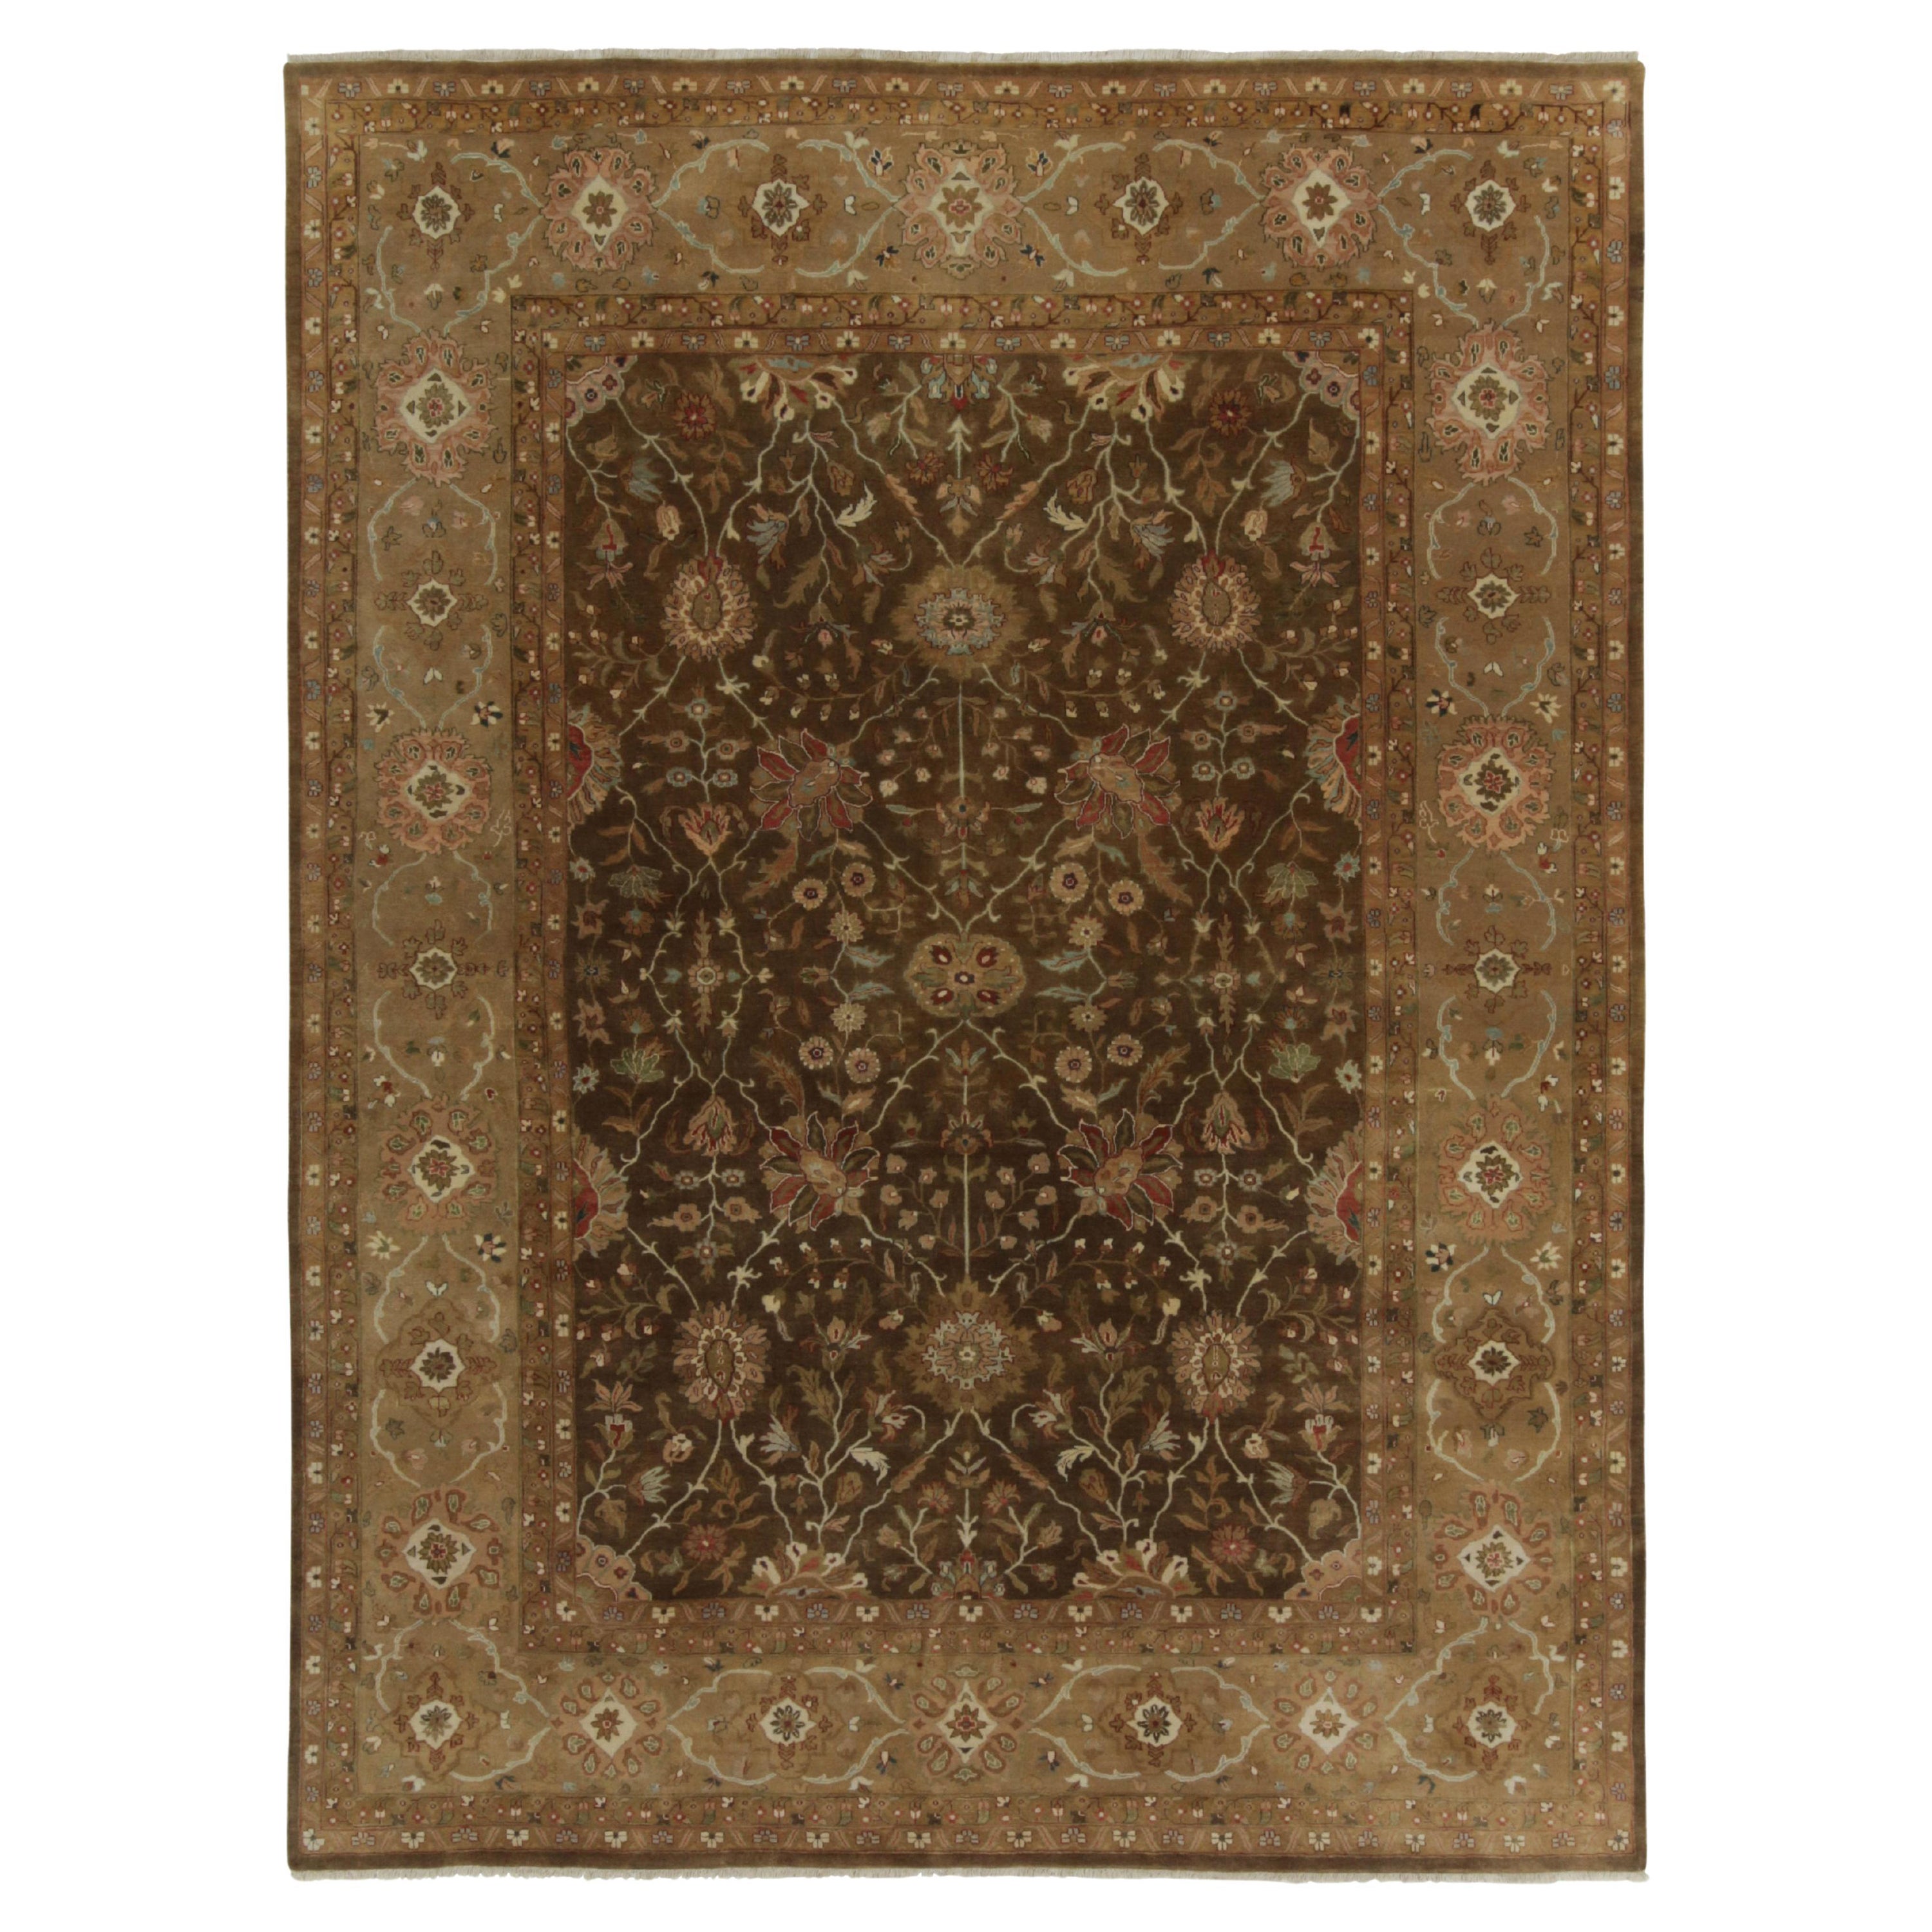 Rug & Kilim’s Tabriz style rug in Brown, Gold and Green Floral Patterns For Sale